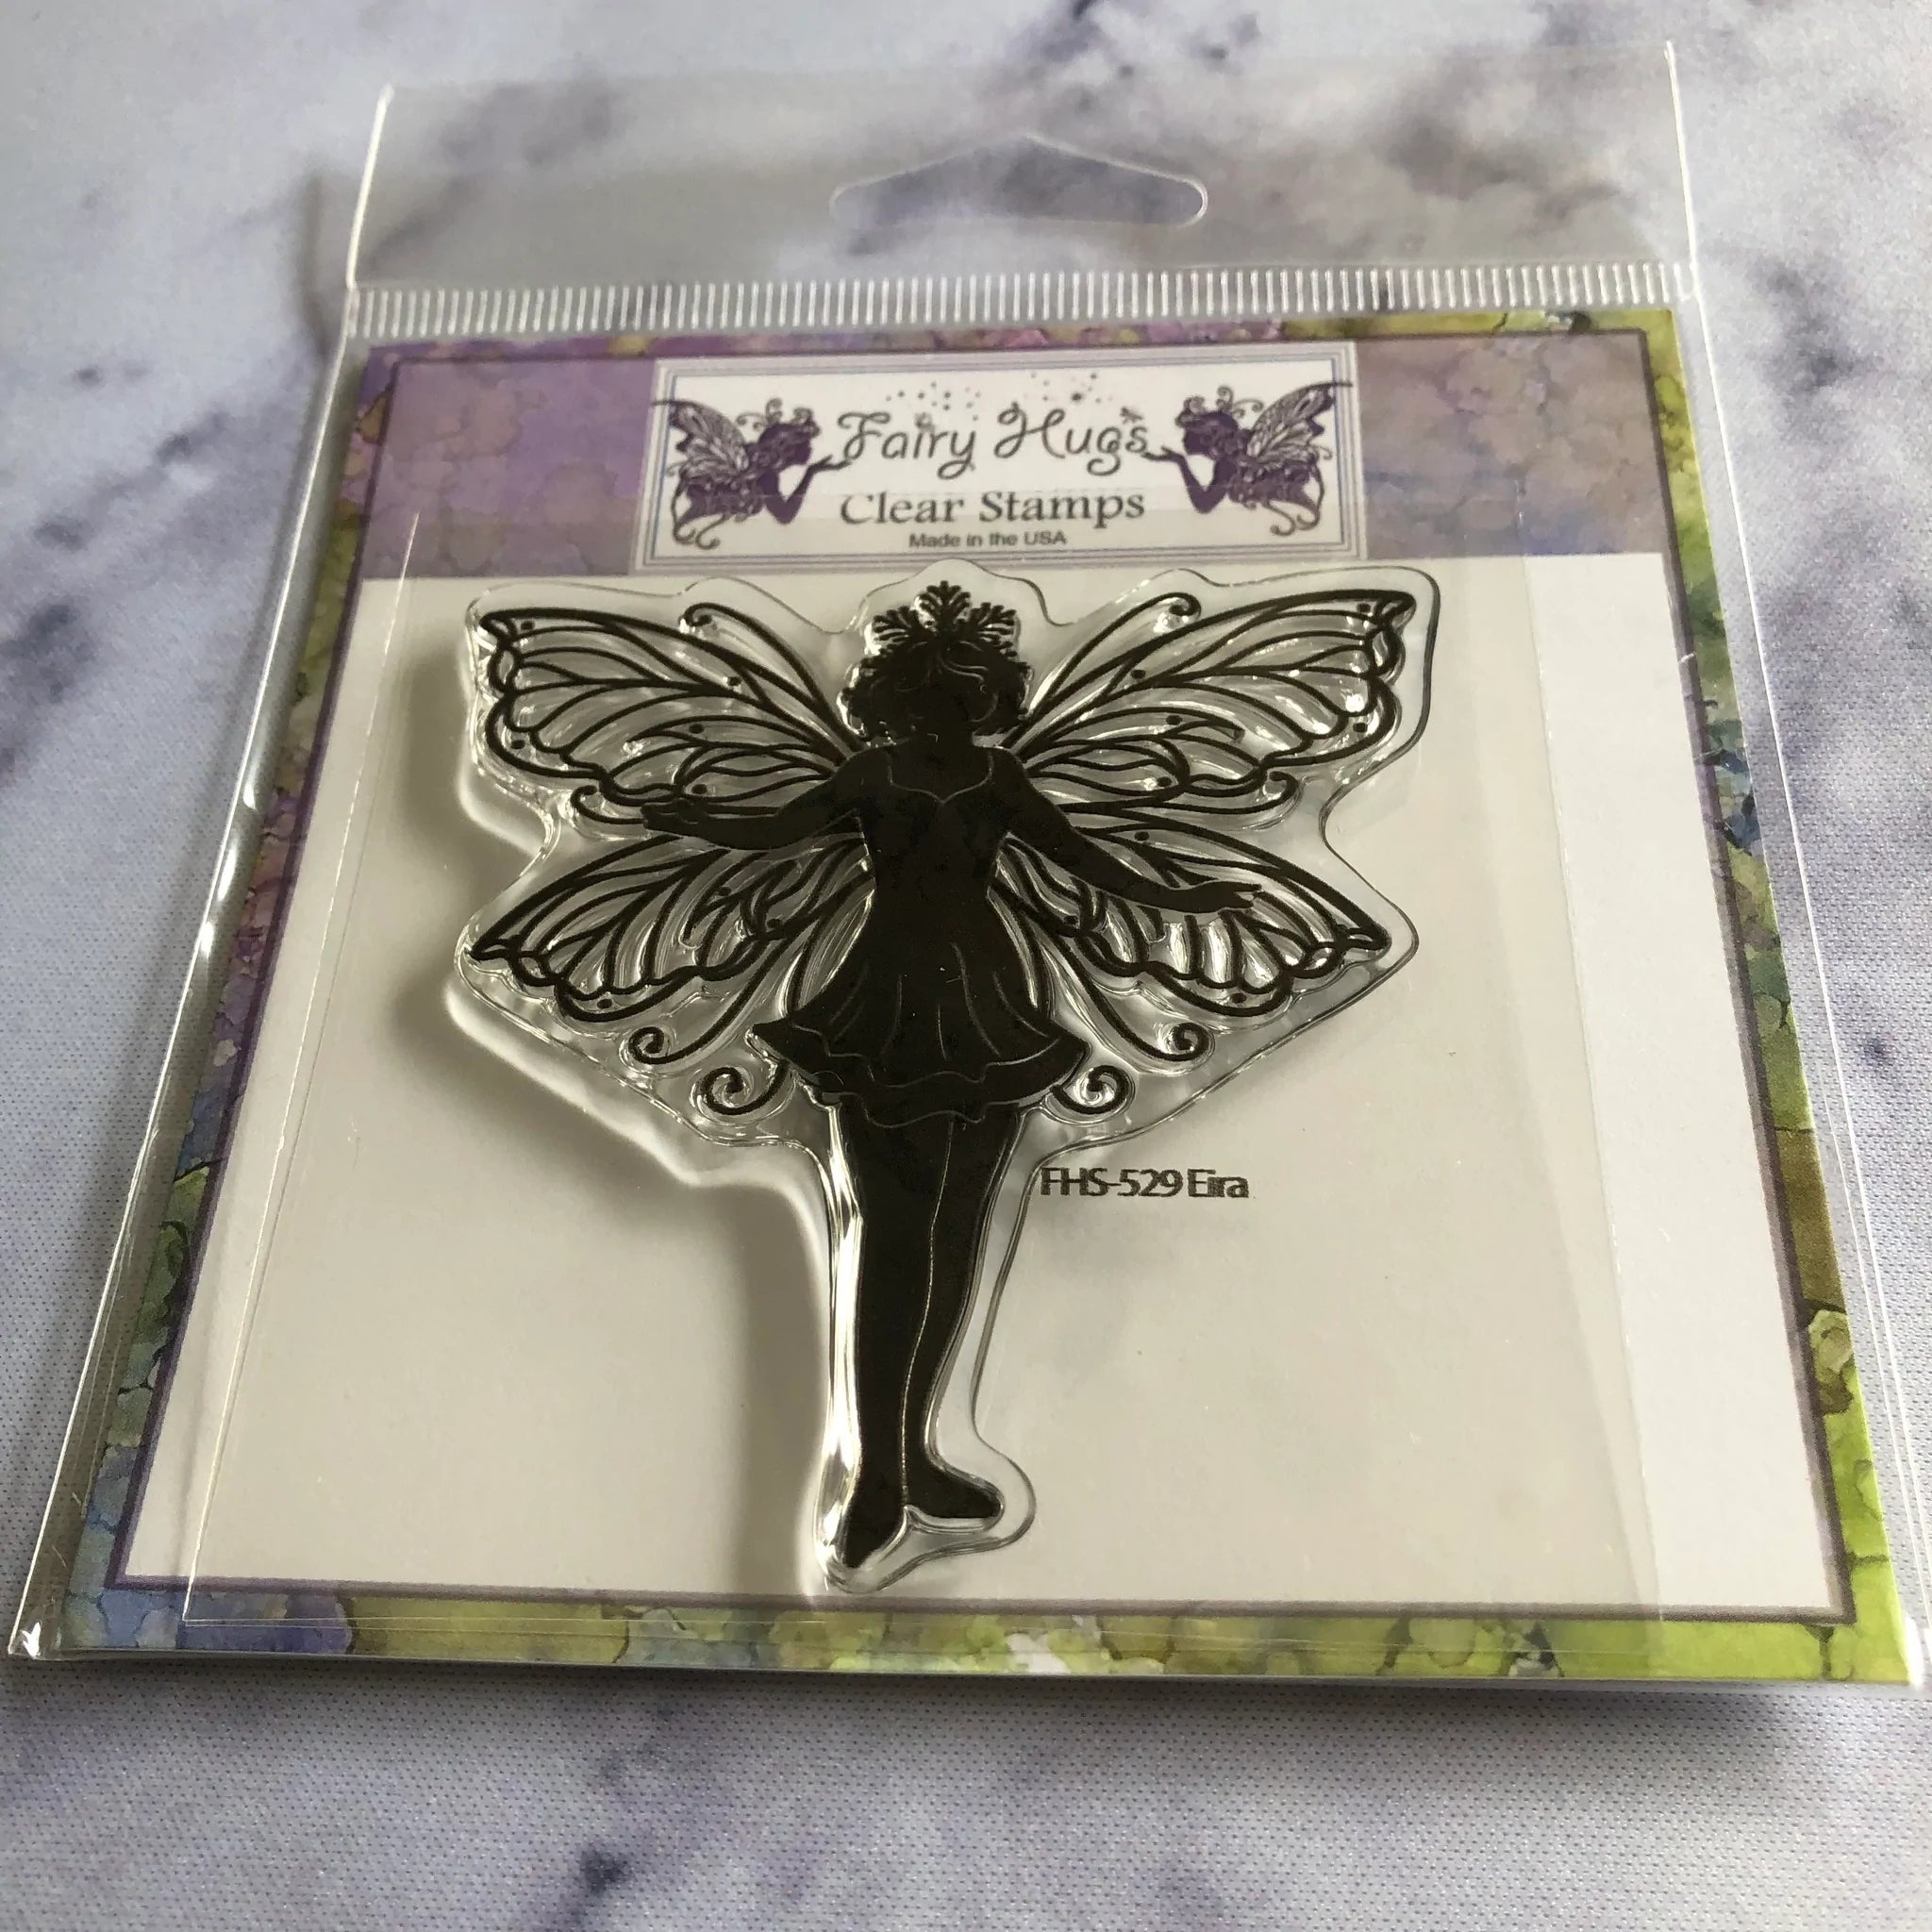 Fairy Hugs Stamps - Eira